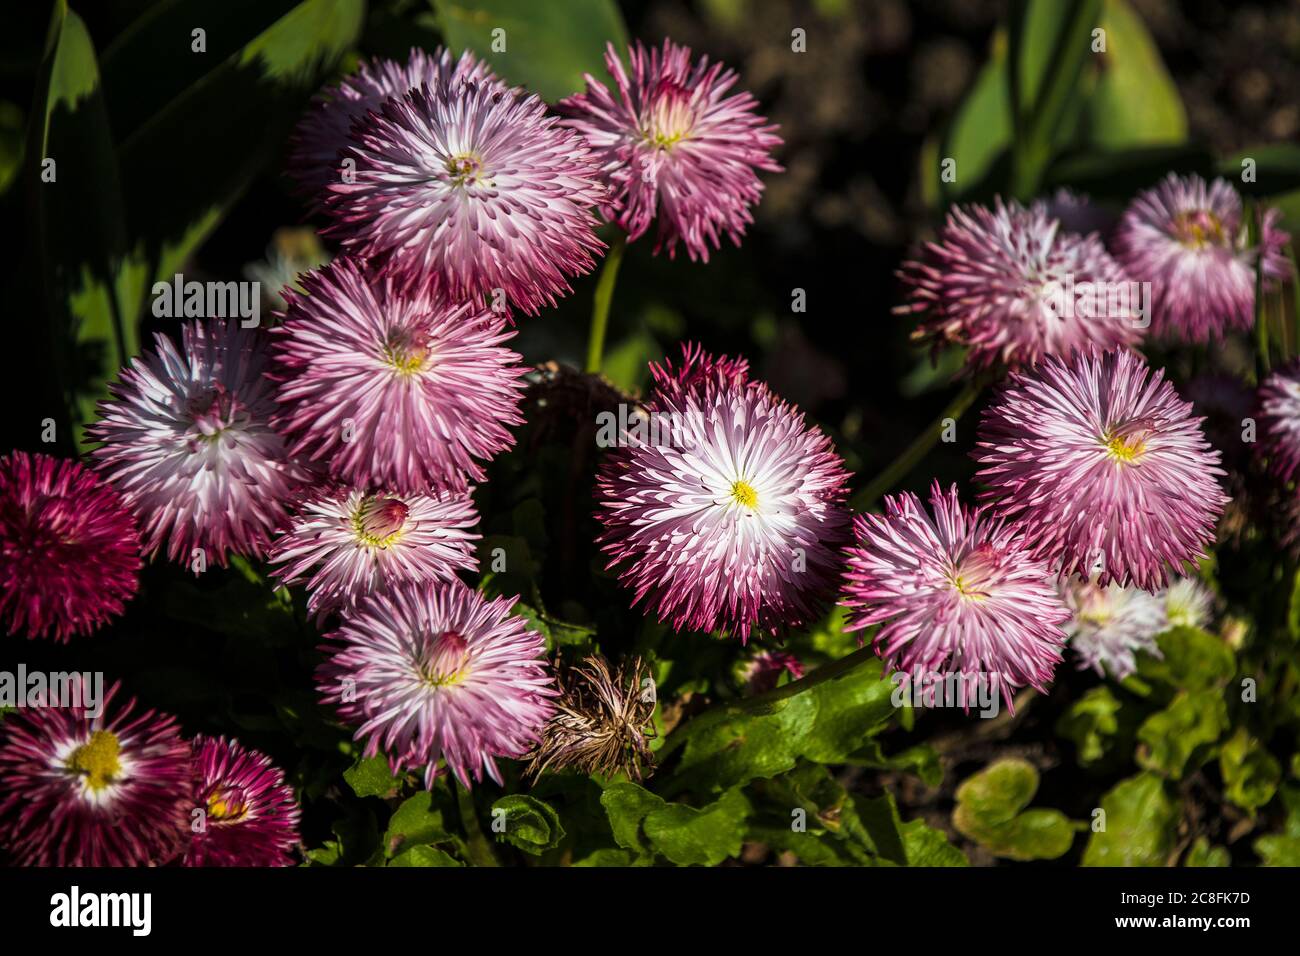 Bellis perennis Pomponette Bicolour Daisy growing in a flower bed. Stock Photo